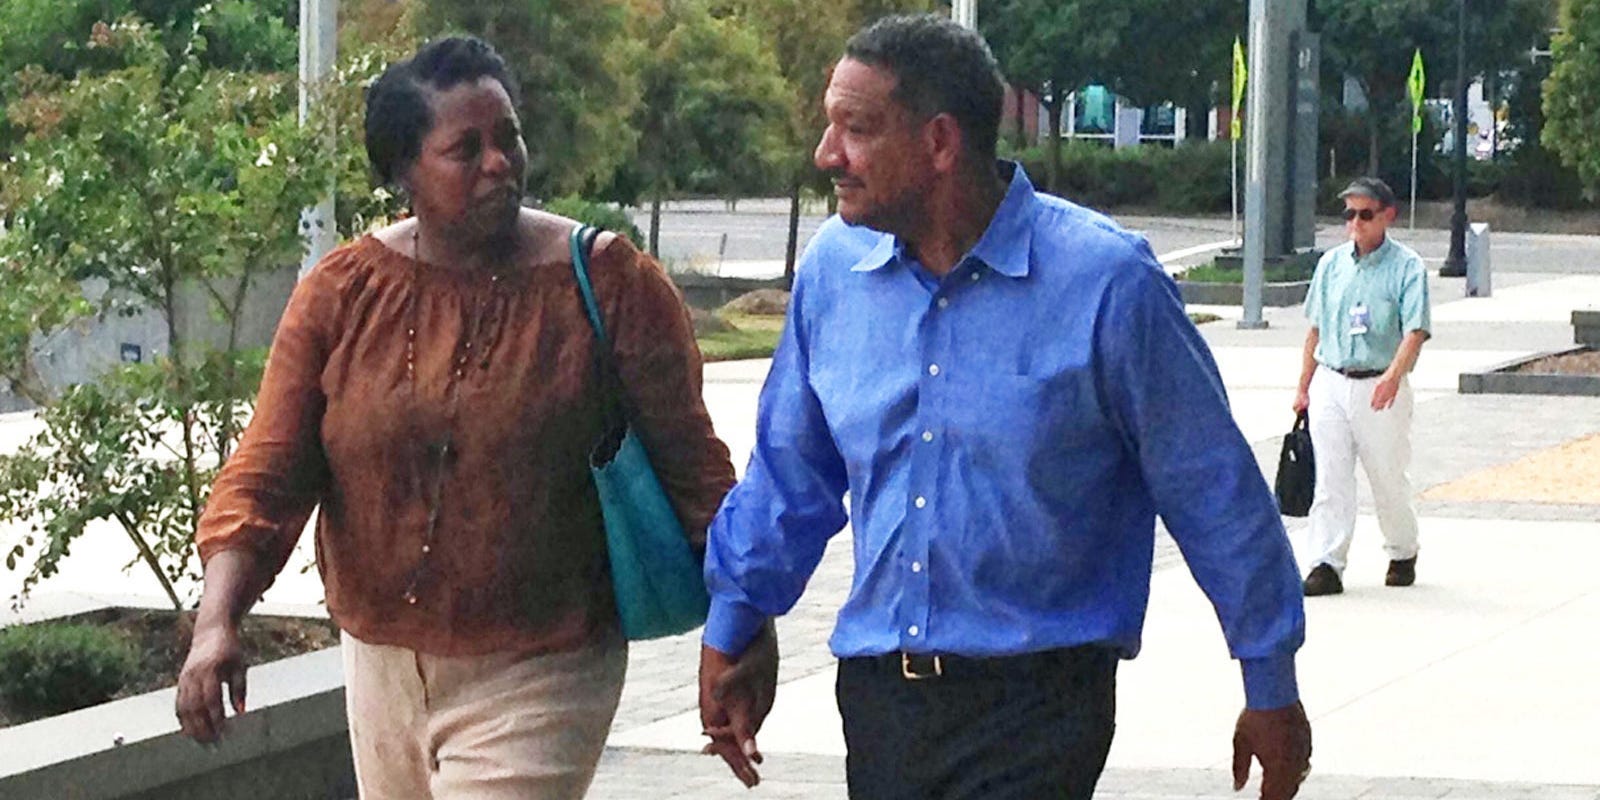 Darryl Howard walks hand in hand with his wife, Nannie, minutes after being freed from prison after serving 21 years in Durham, N.C., Wednesday, Aug. 31, 2016. A judge earlier Wednesday threw out Howard's 1995 double-murder conviction. Prosecutors decided not to appeal the judge's decision.